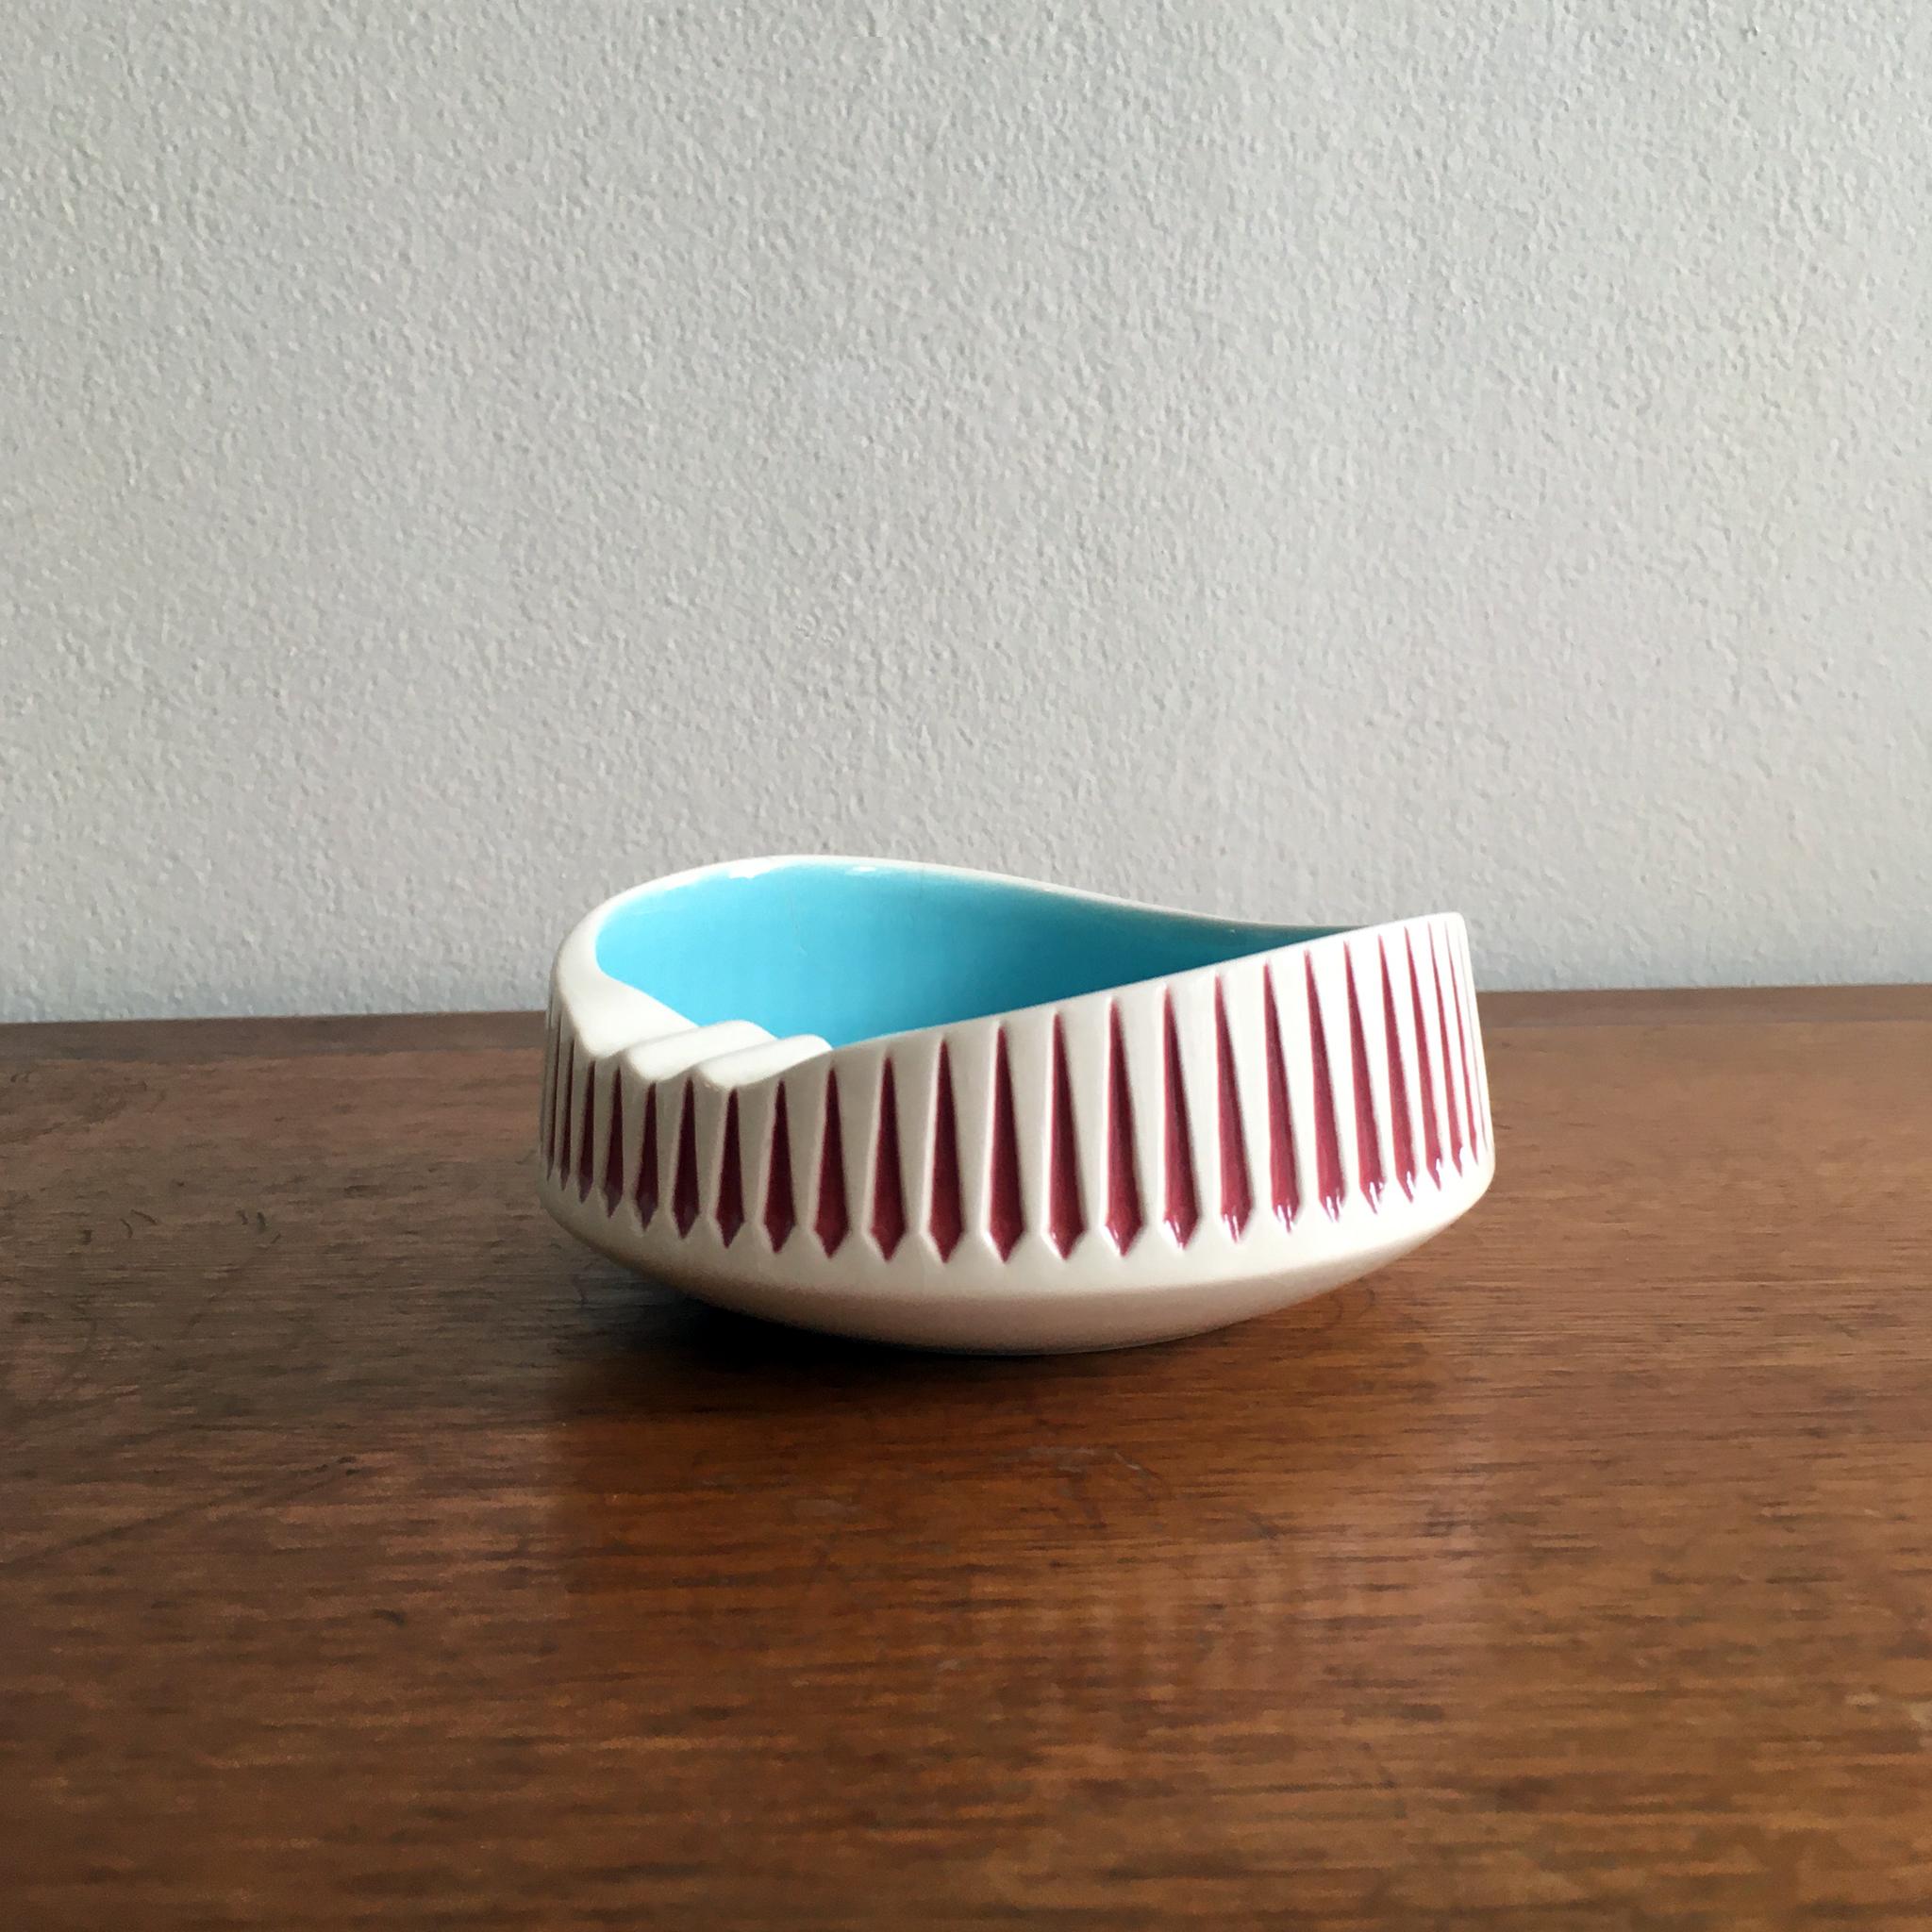 Stunning Hornsea Pottery midcentury ashtray/ catchall from Hornsea, England. Designed by John Clappison, pattern number 234.